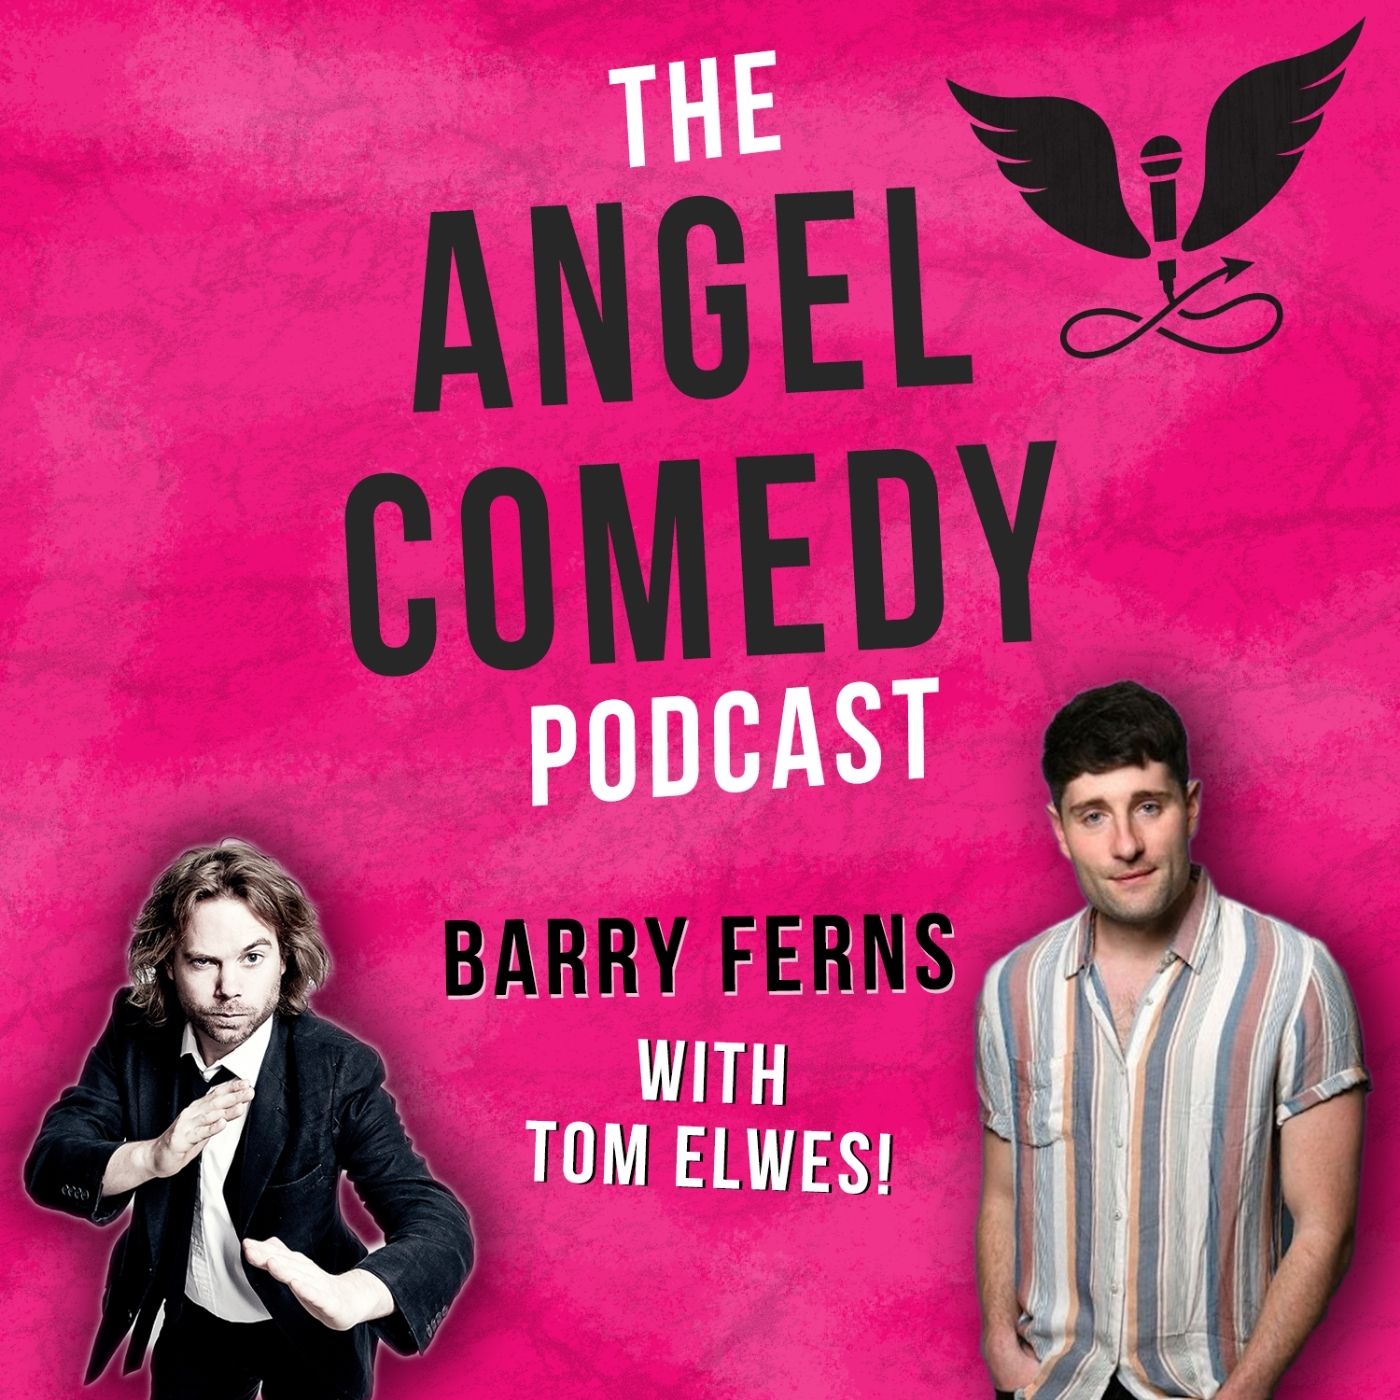 The Angel Comedy Podcast with Tom Elwes